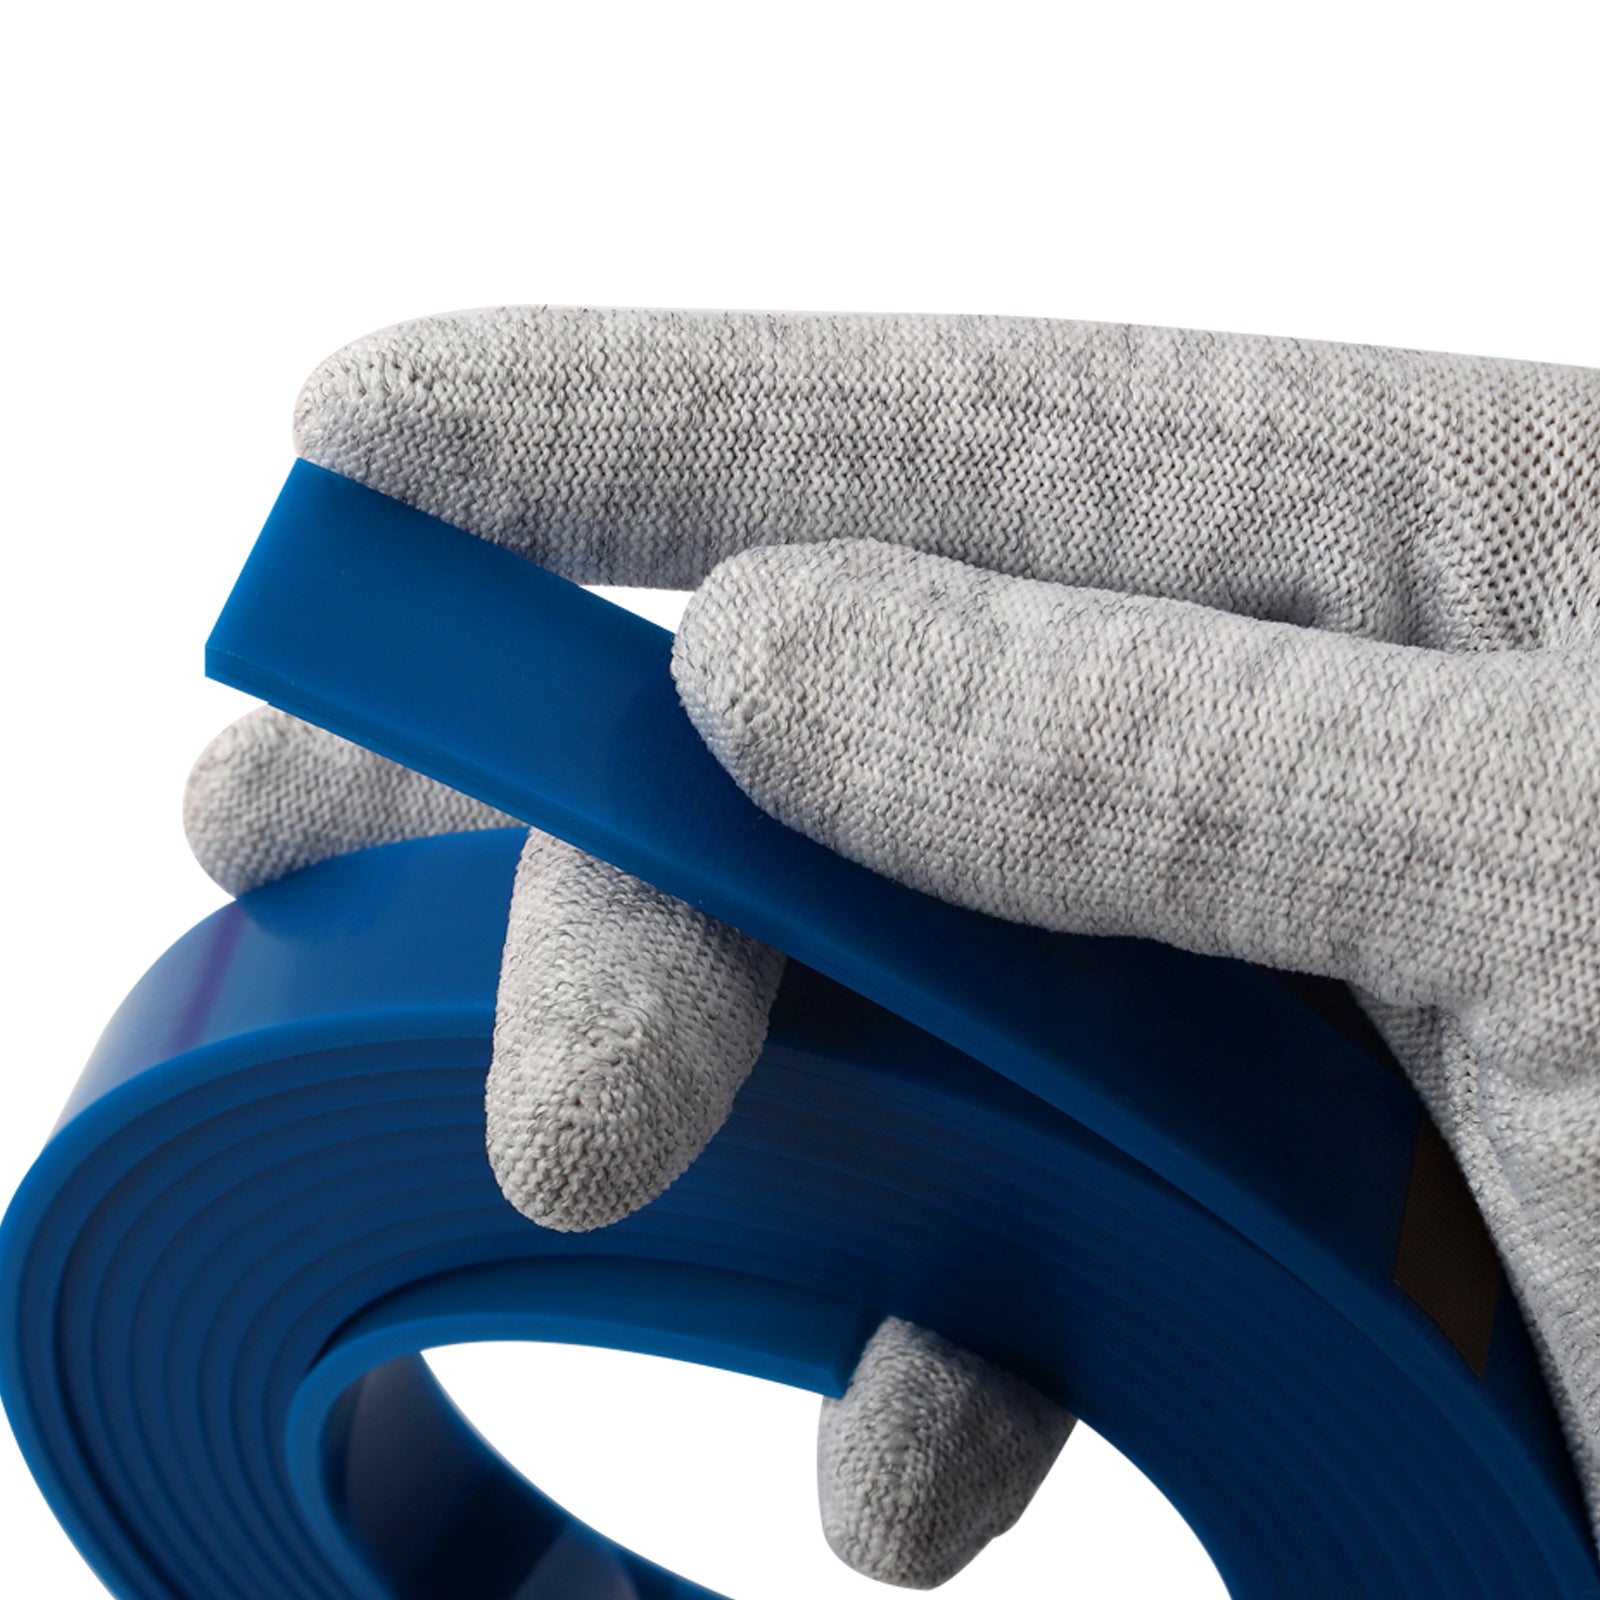 Hand holding a blue Fusion Squeegee Channel Refill, demonstrating its easy handling and application.